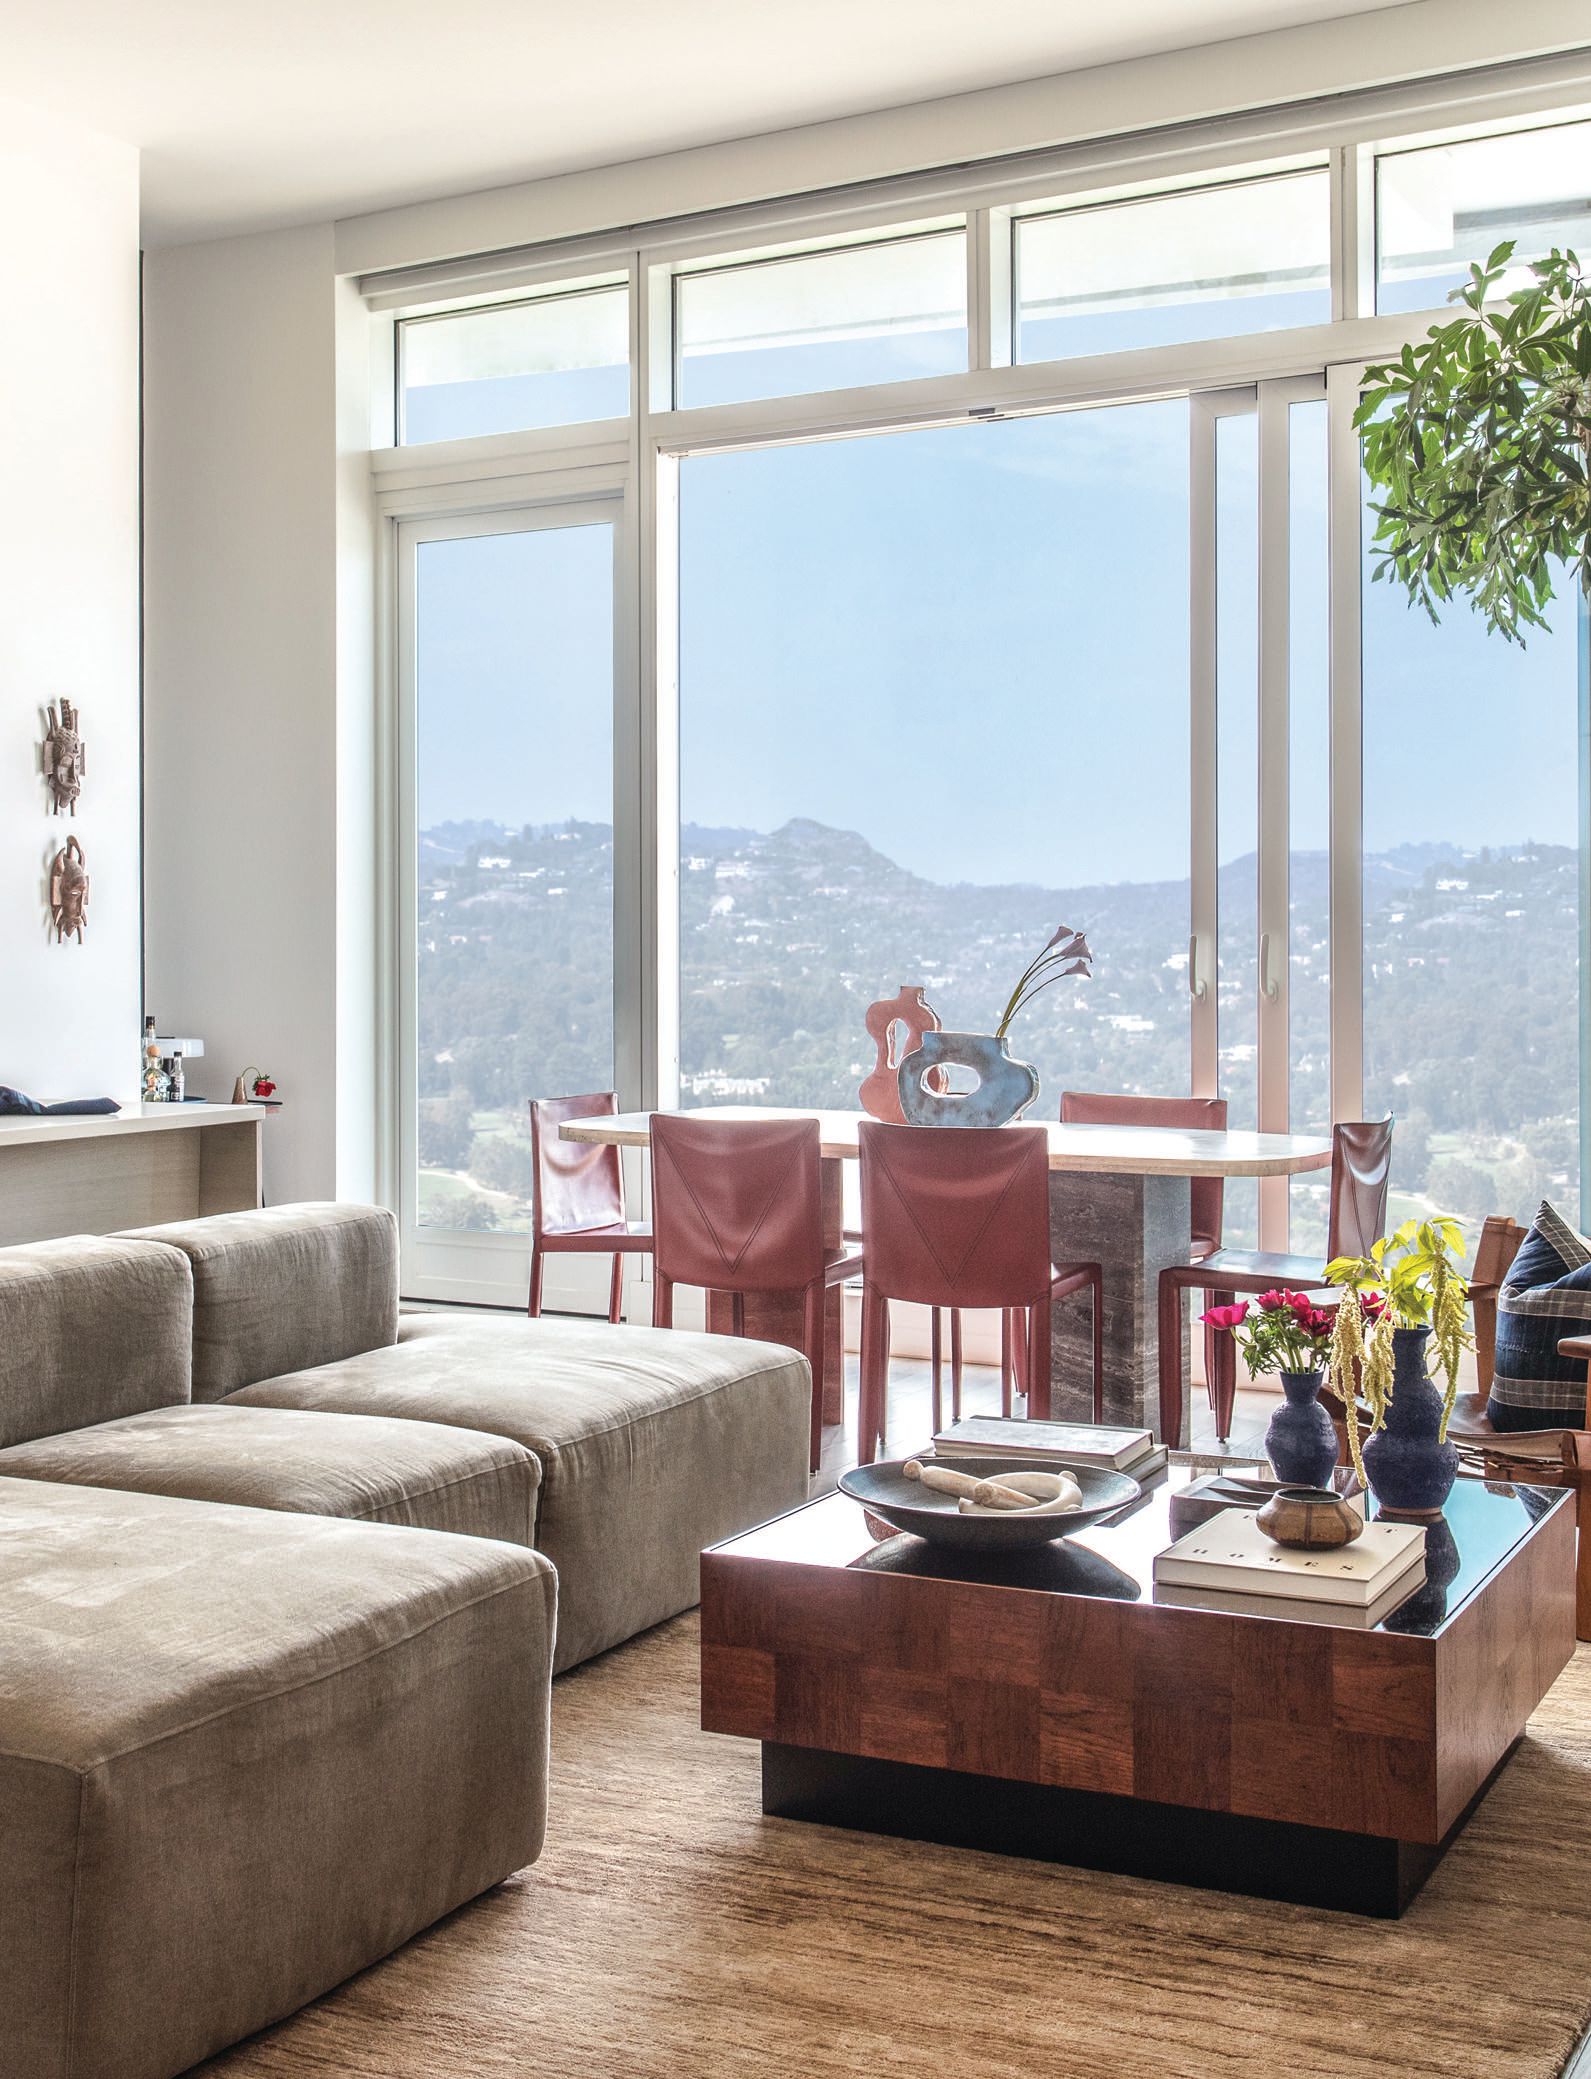 Piscione created a custom sectional for the living room, which overlooks The Los
Angeles Country Club. PHOTOGRAPHED BY MICHAEL CLIFFORD